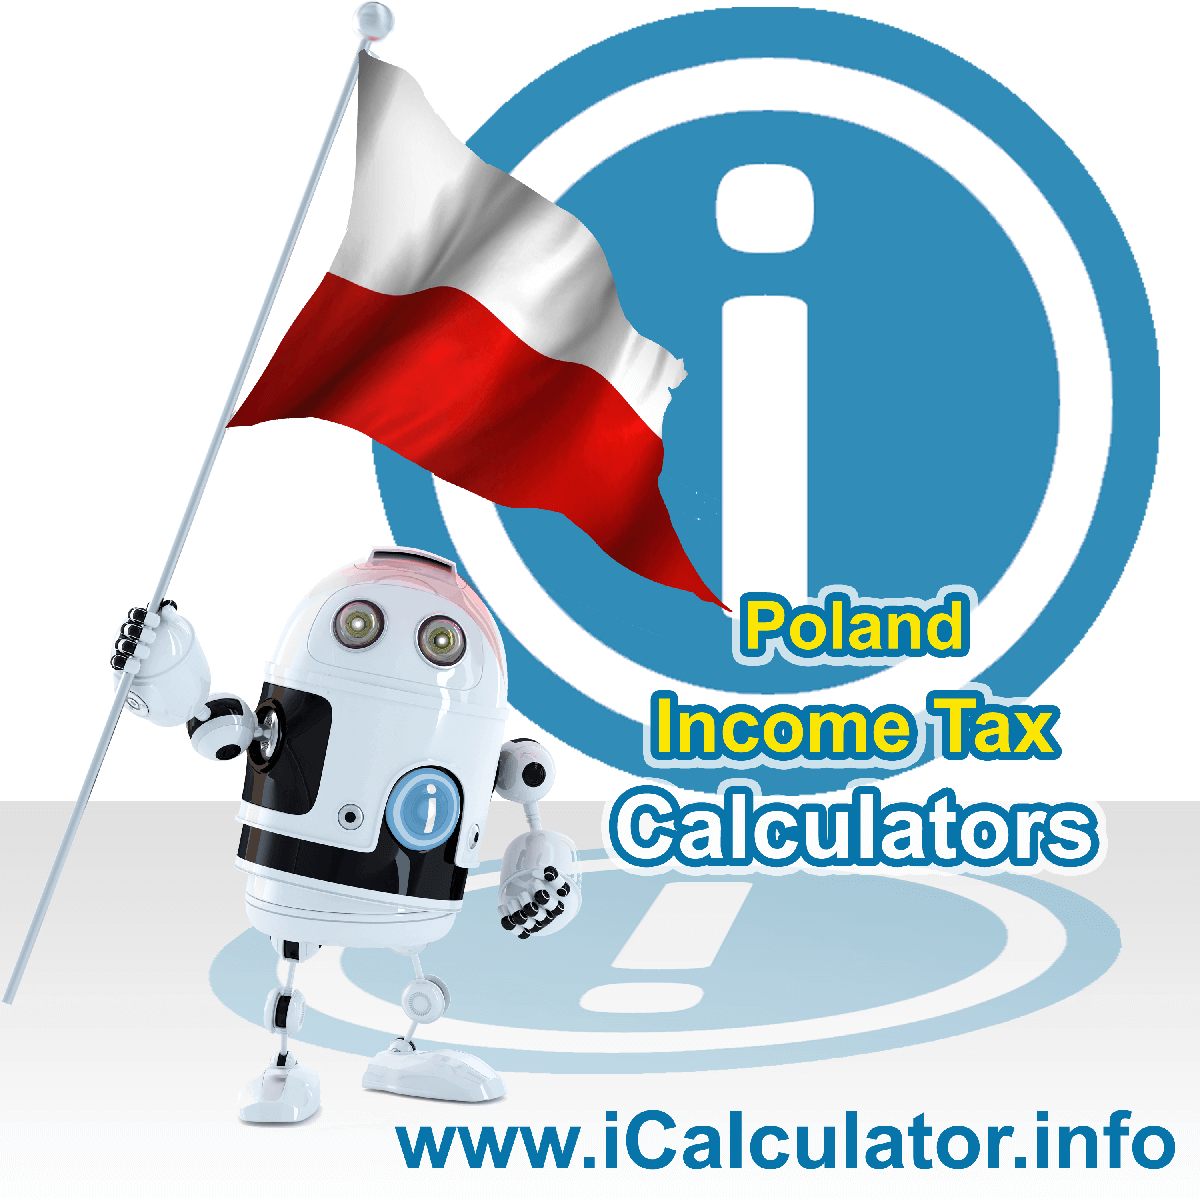 Poland Income Tax Calculator. This image shows a new employer in Poland calculating the annual payroll costs based on multiple payroll payments in one year in Poland using the Poland income tax calculator to understand their payroll costs in Poland in 2023